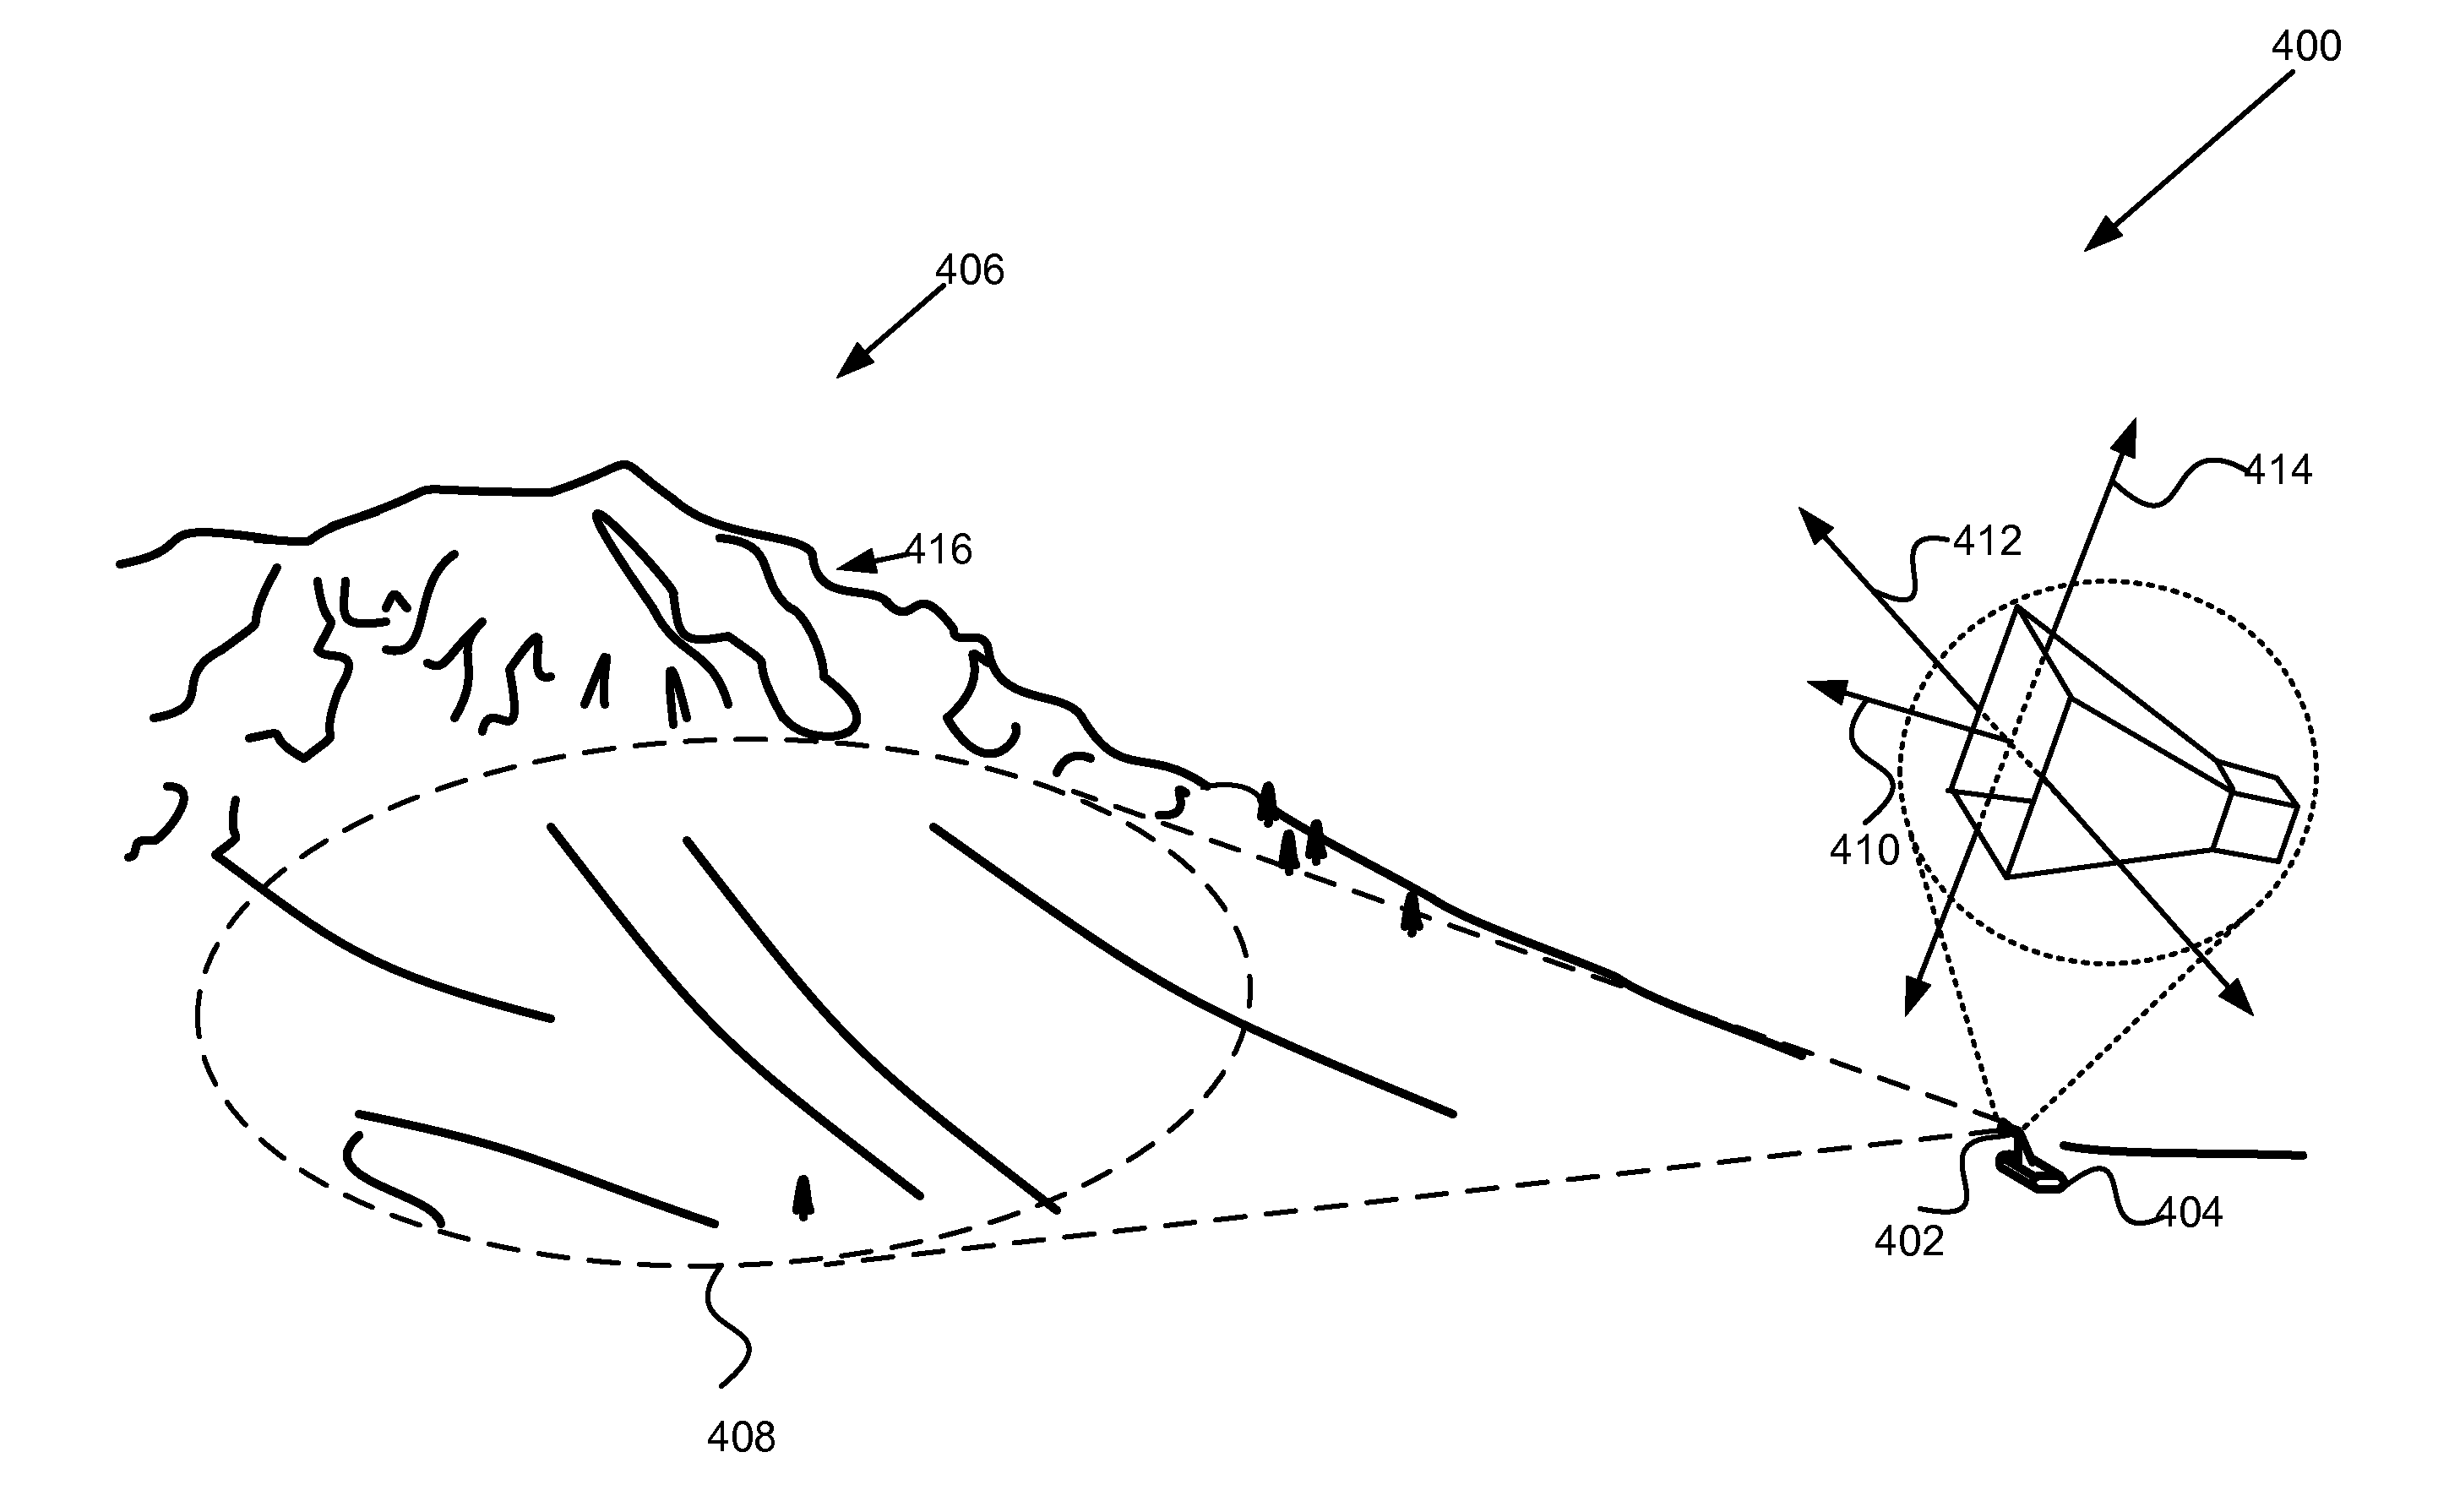 Method, apparatus, and system to remotely acquire information from volumes in a snowpack